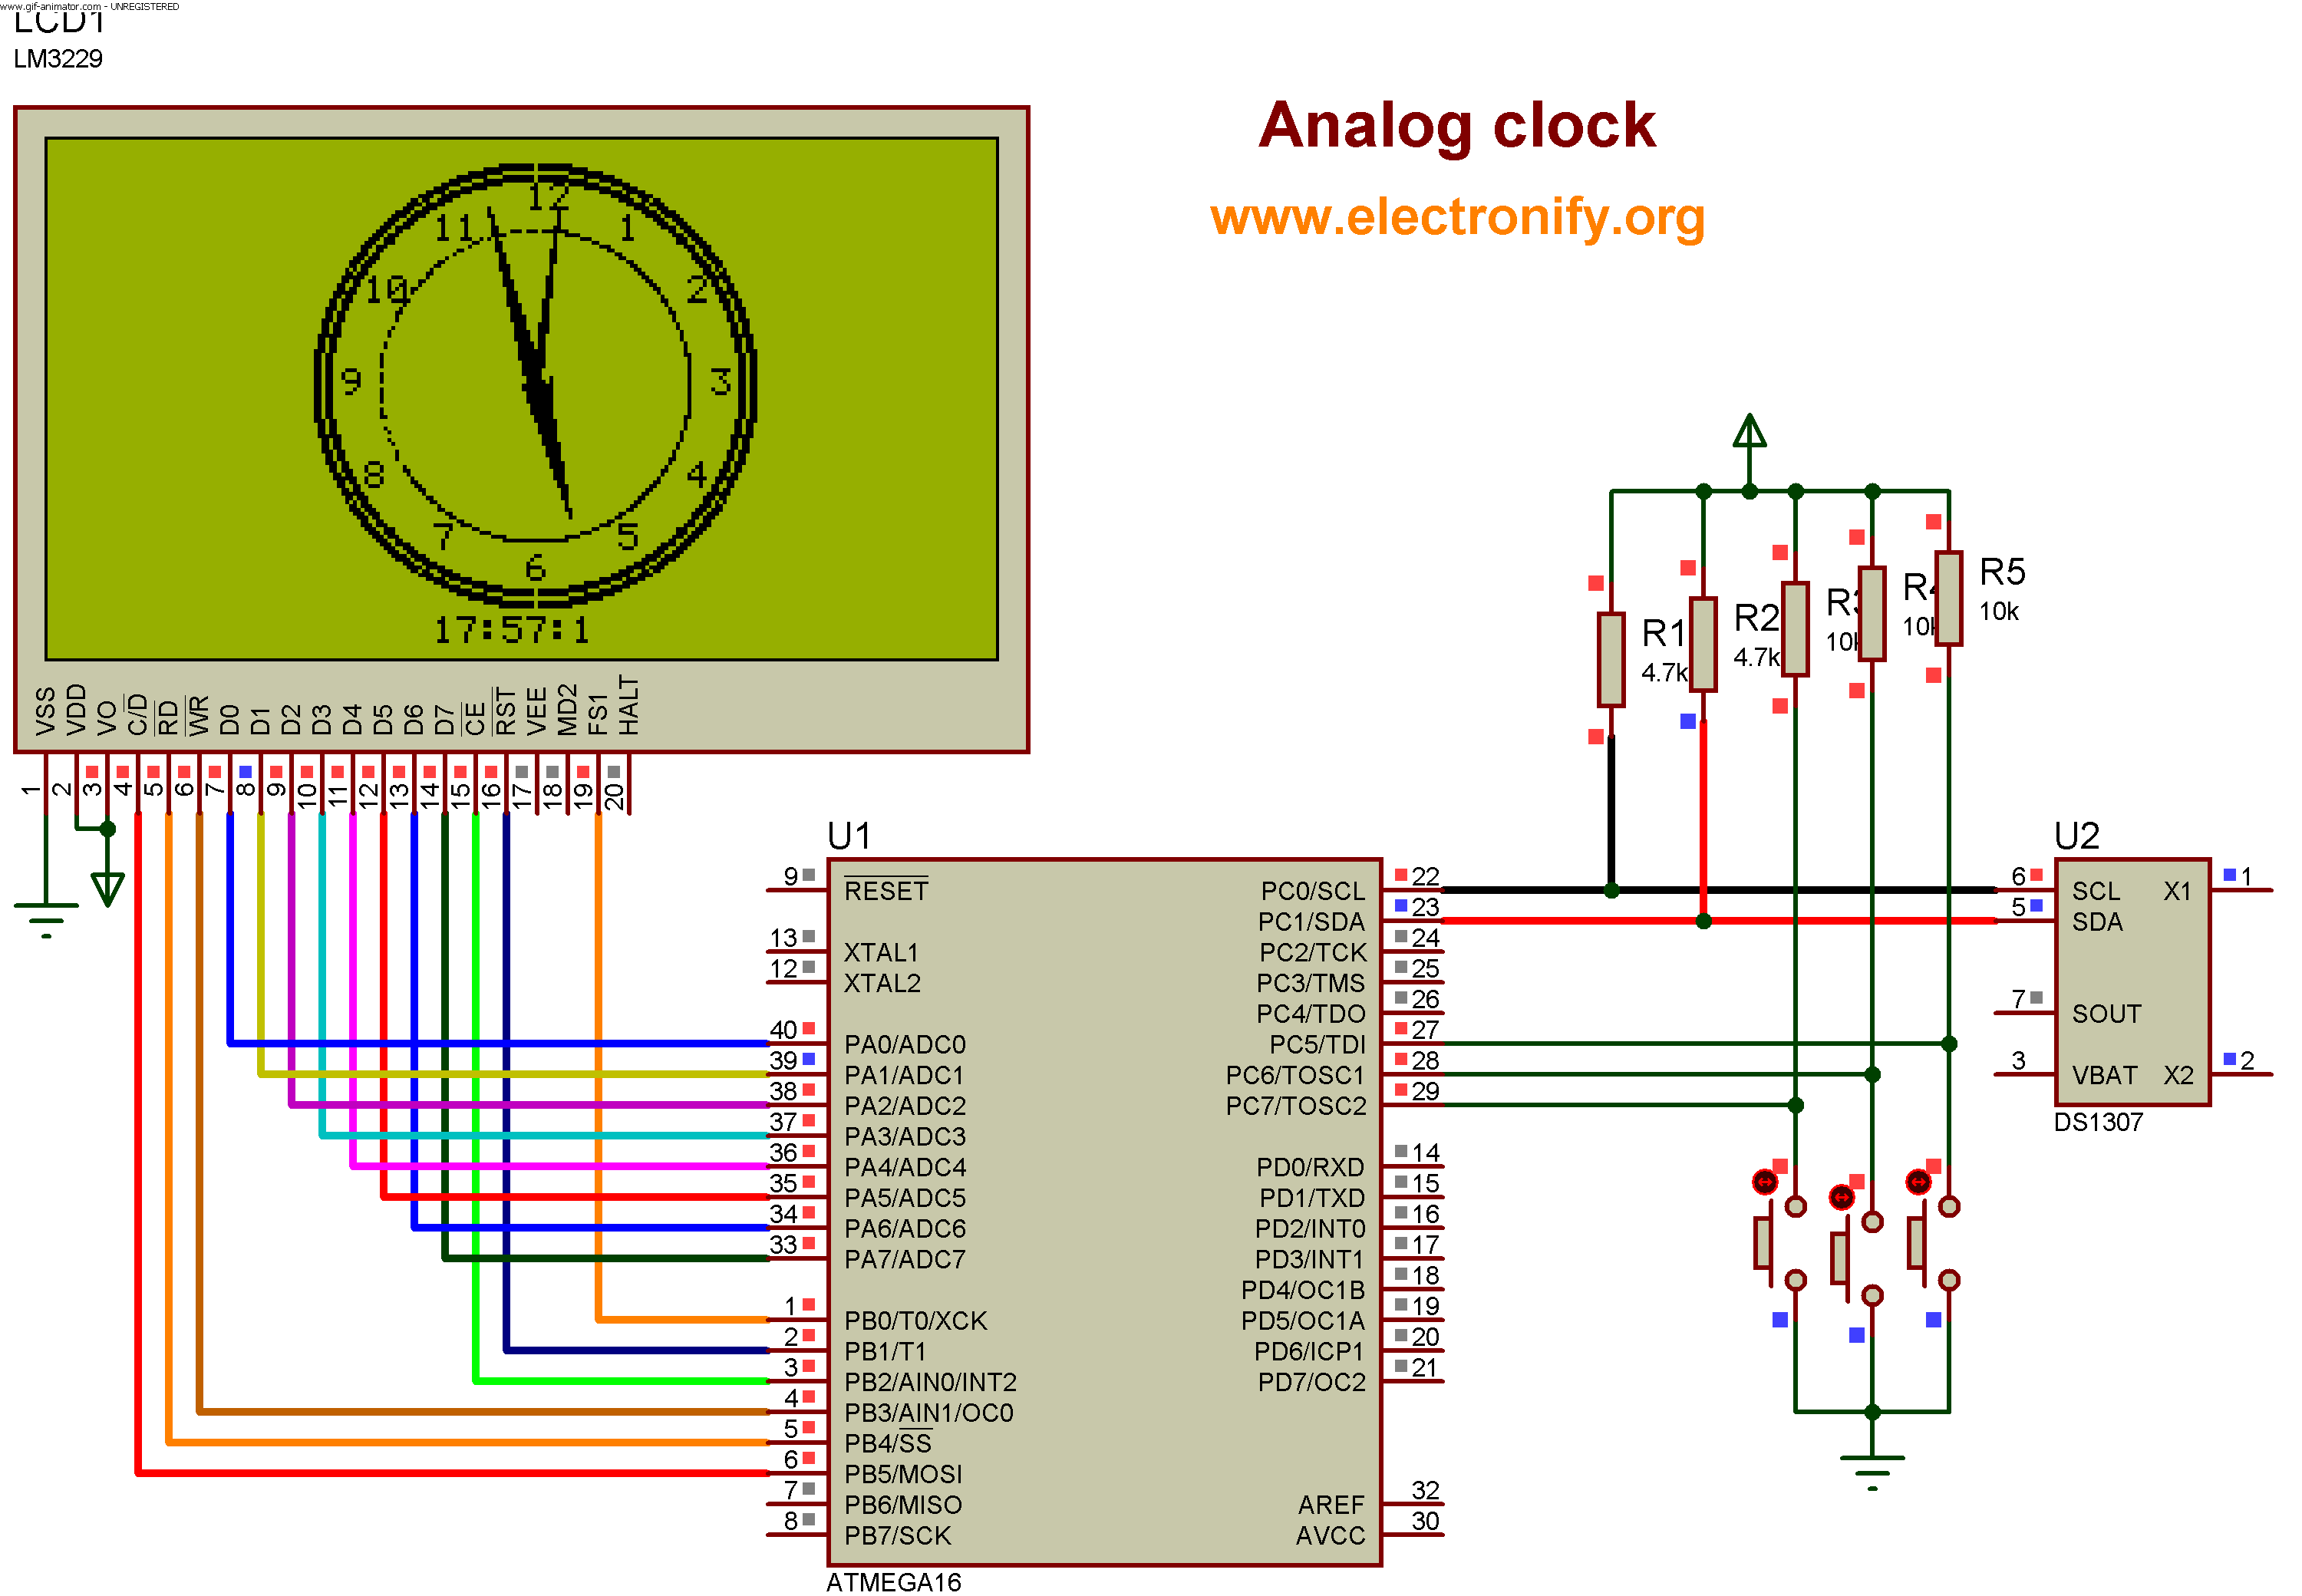 analog clock using atmega16 proteus isis file with code – Electronify